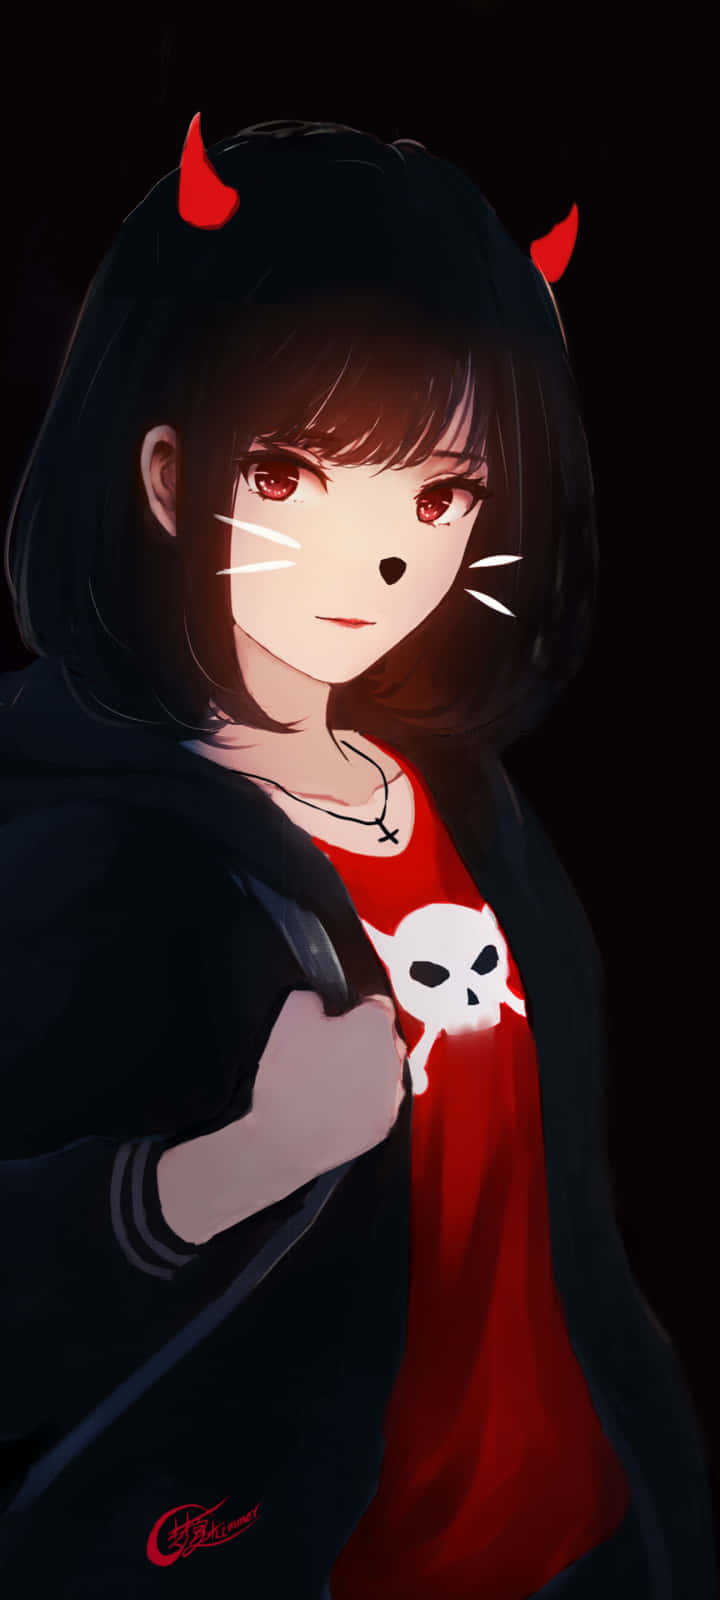 A Girl With Horns And A Red Shirt Wallpaper